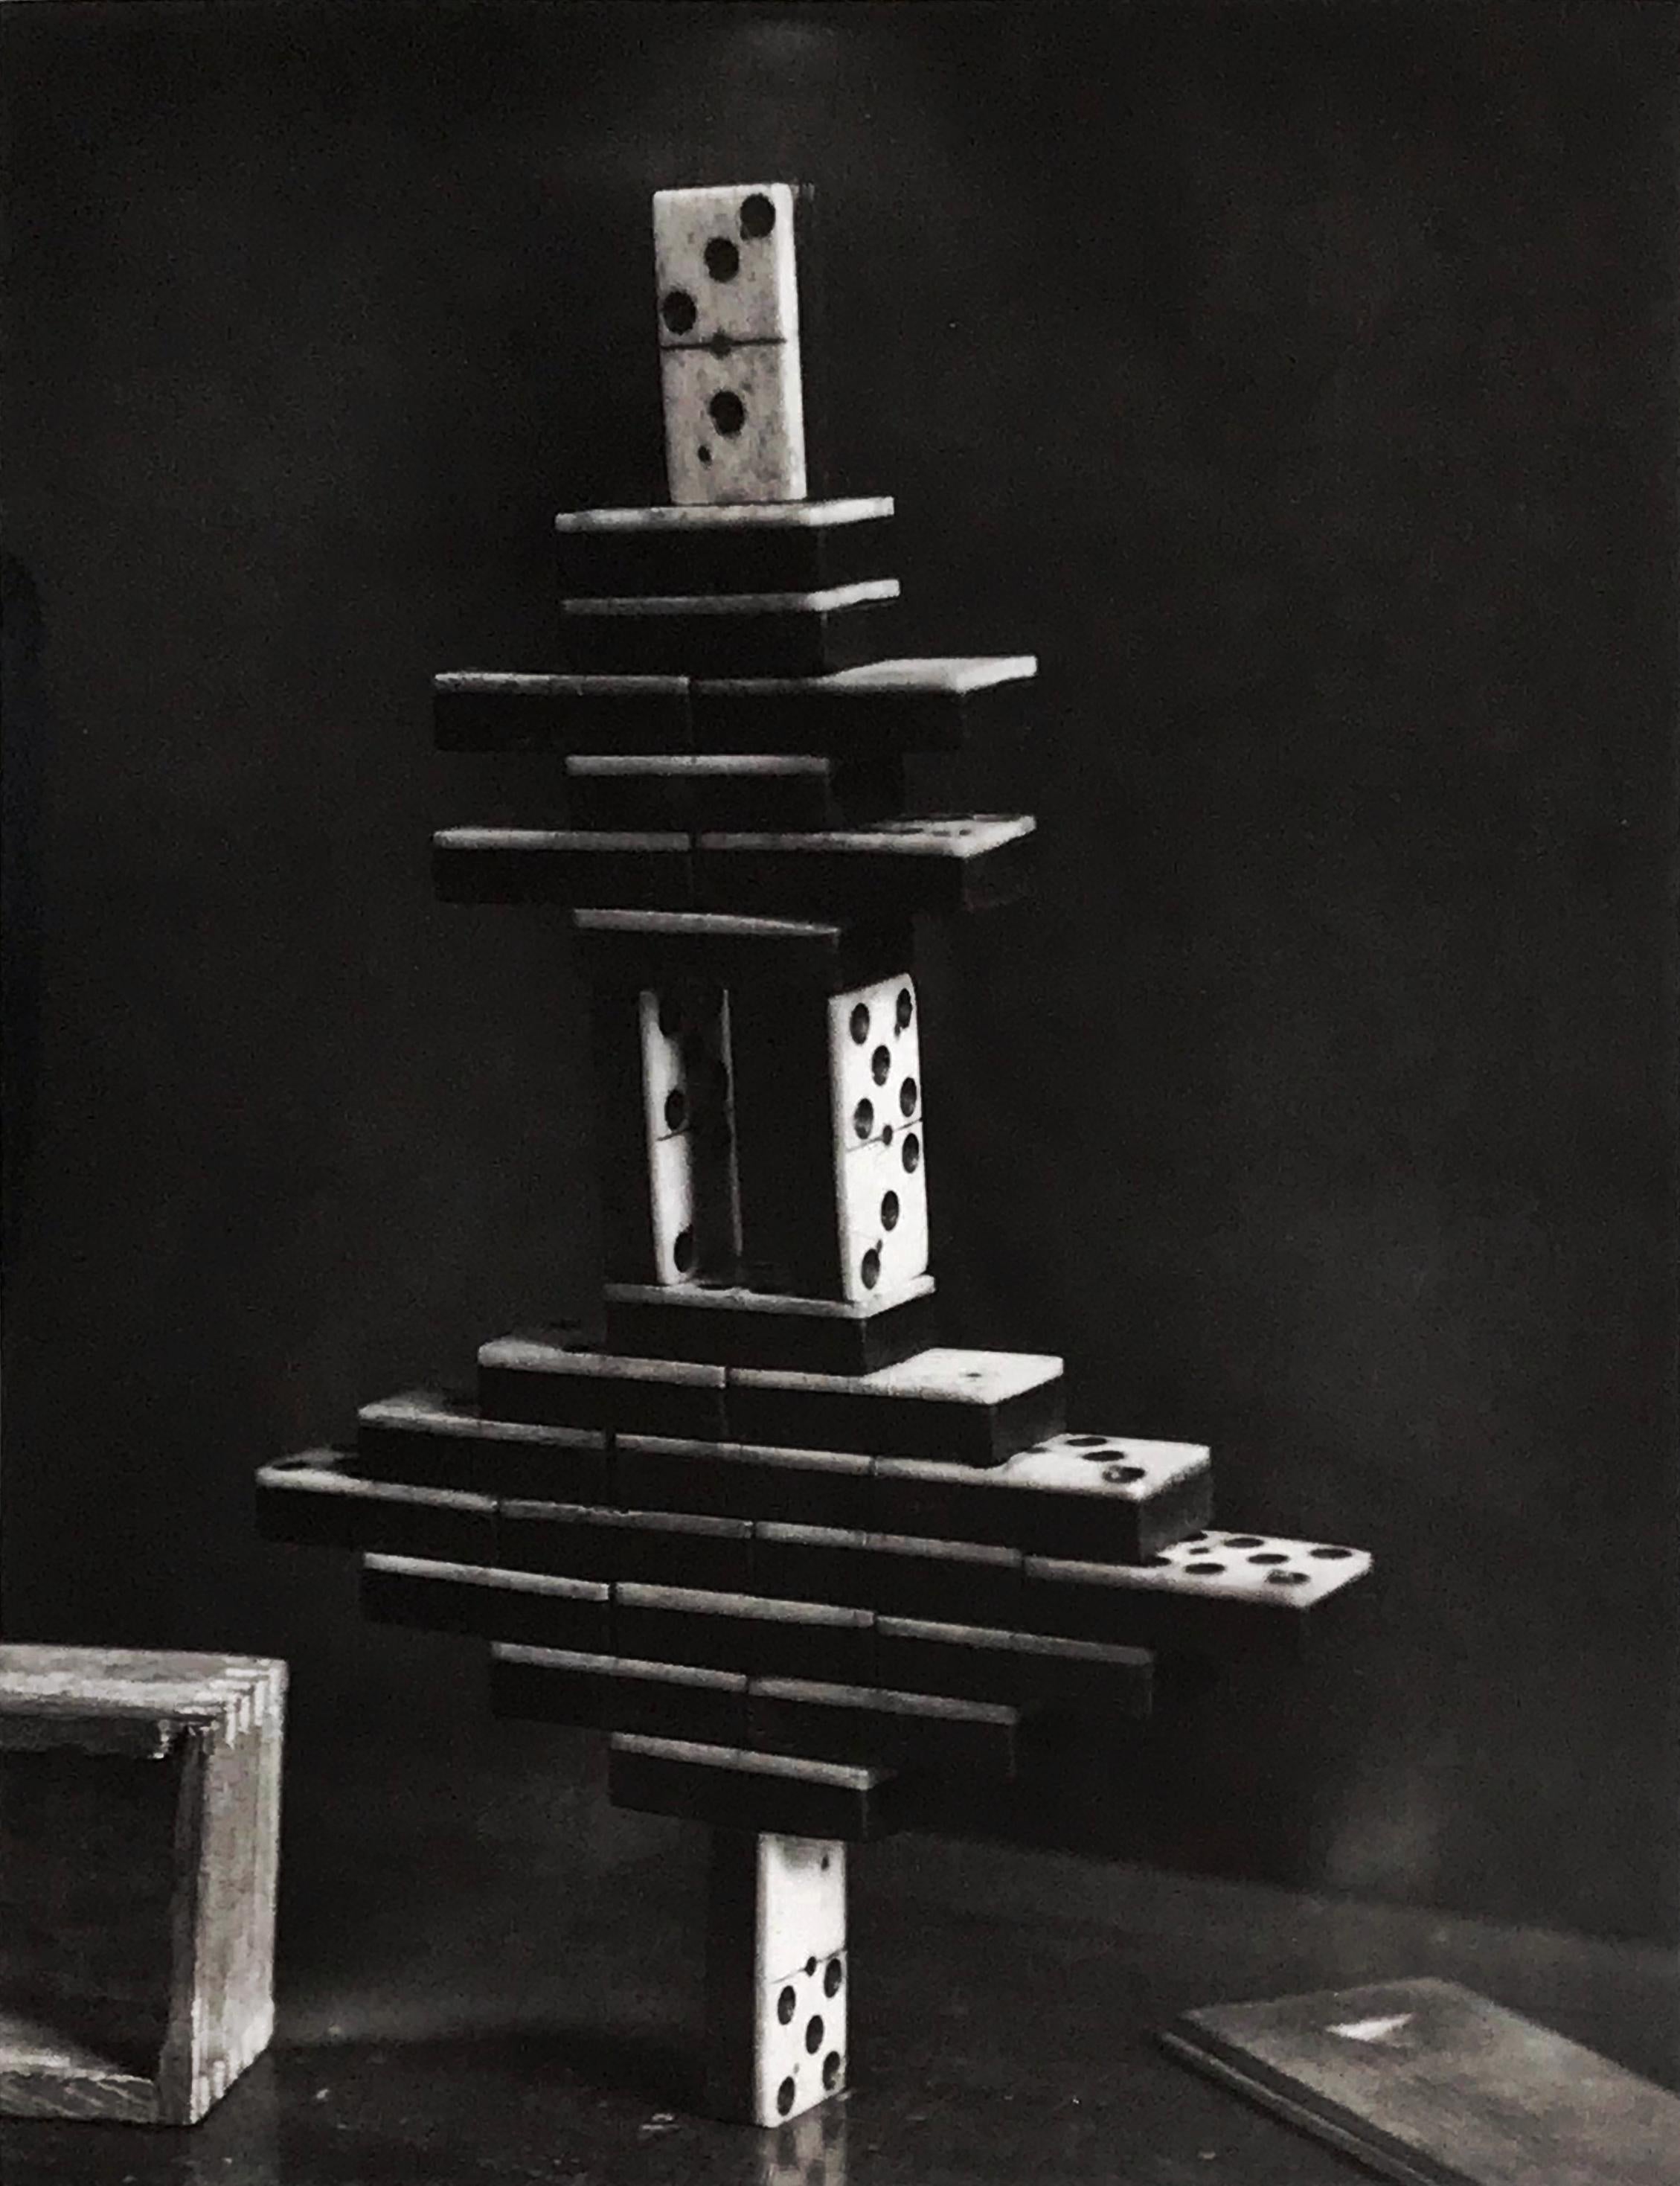 McDermott & McGough Black and White Photograph - Experiment upon the center of gravity made on a set of Dominoes...